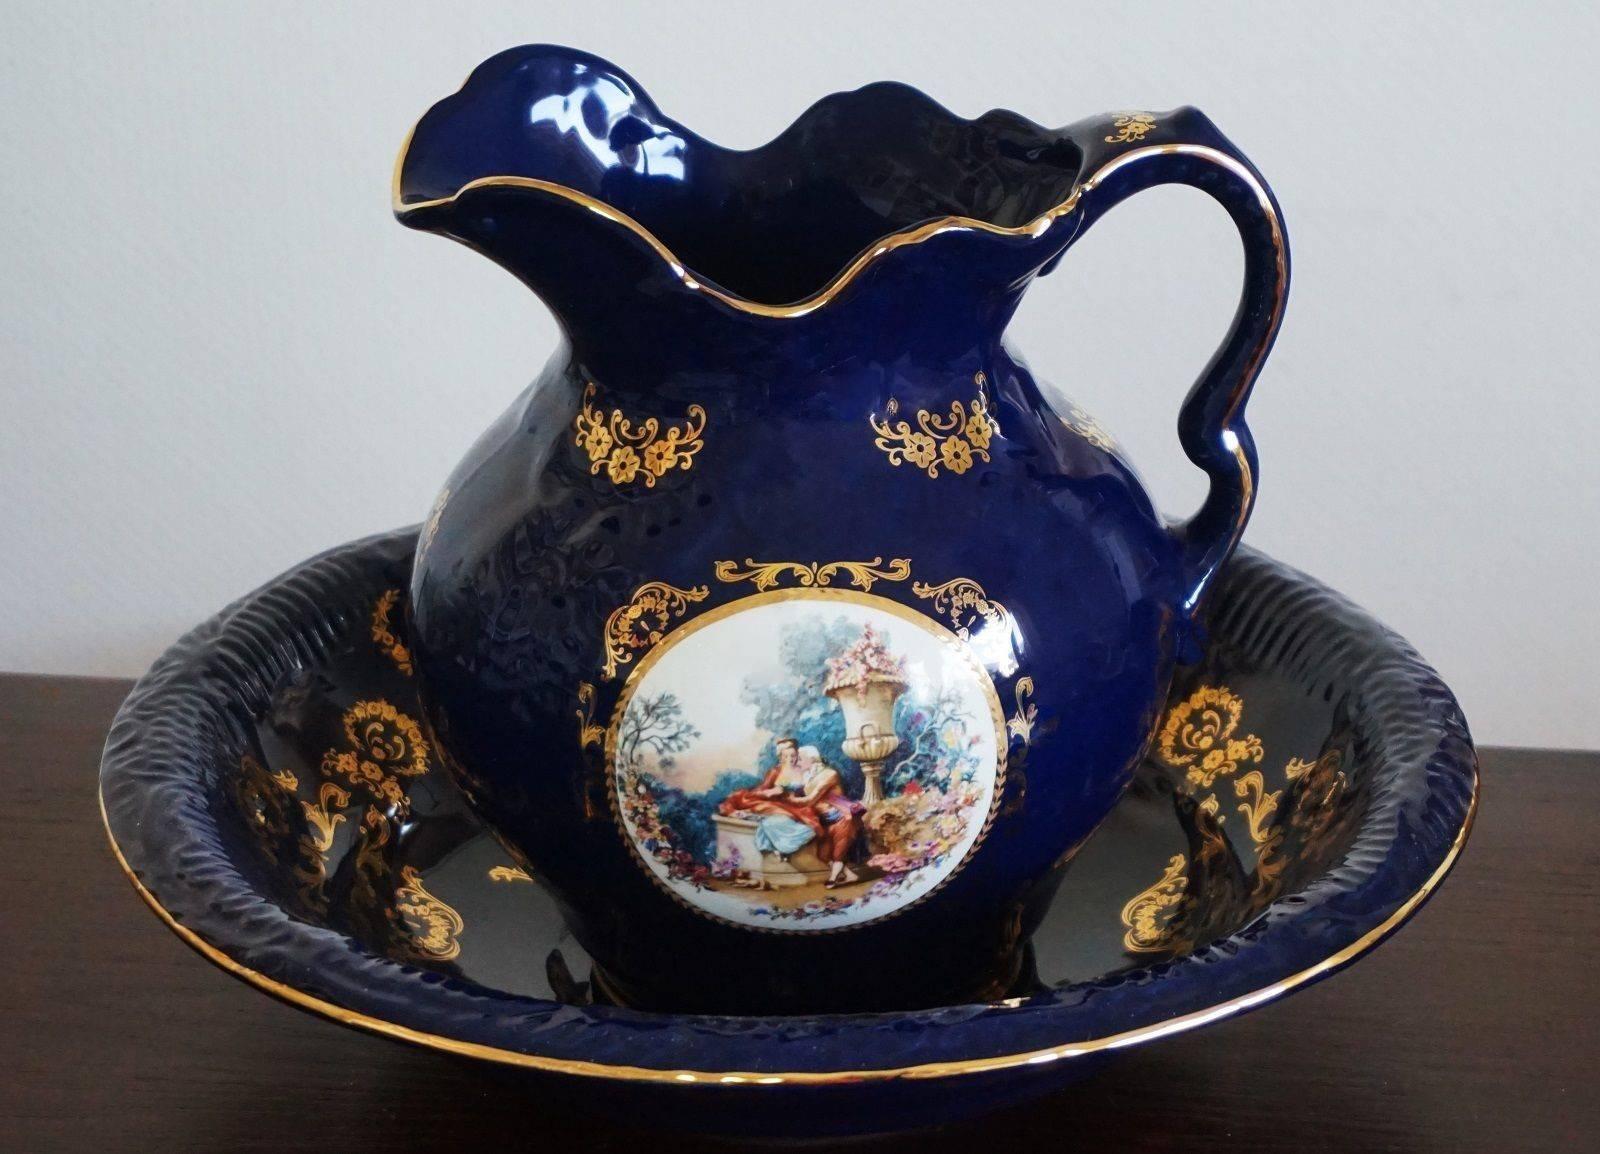 Beautiful Victorian style cobalt blue porcelain wash bowl and pitcher, Portugal, mid-20th century. Hand painted courting scene at both sides and gilded decor, marked.
In excellent condition, color very well preserved (some of the images show white